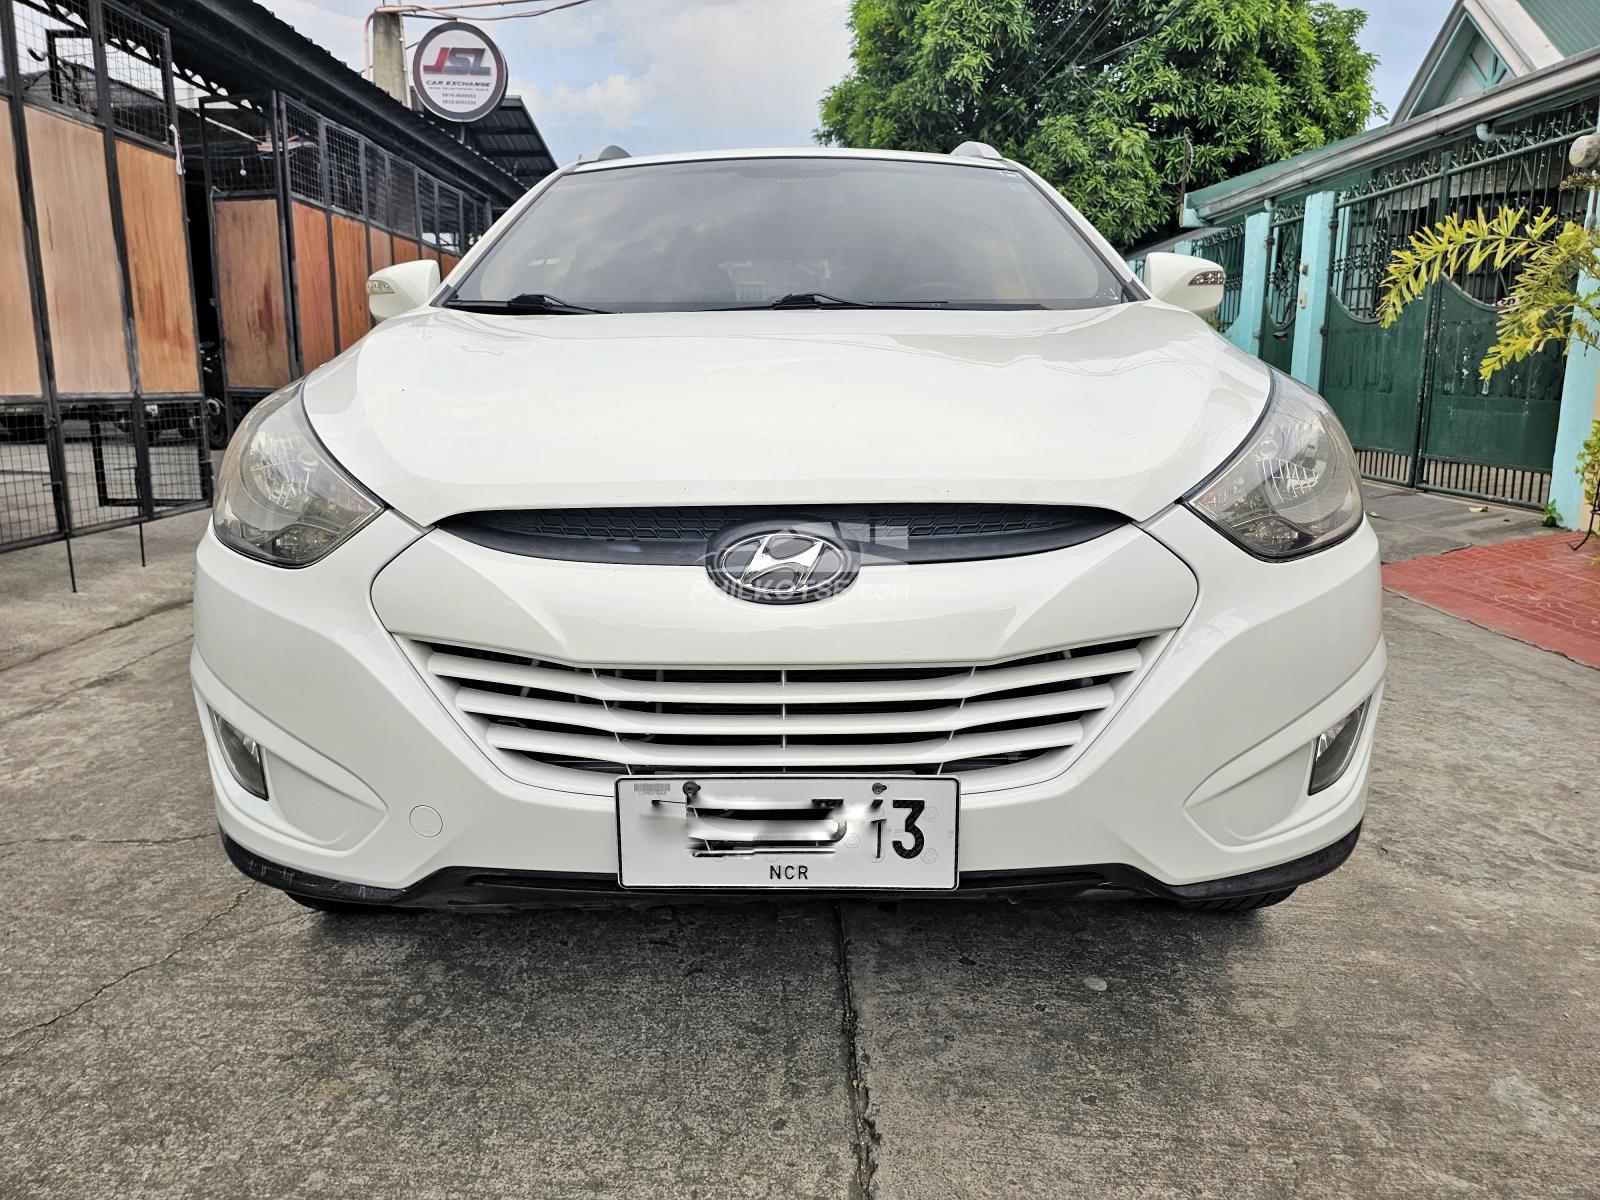 2012 Hyundai Tucson 2.0 GL 6AT 2WD in Bacoor, Cavite